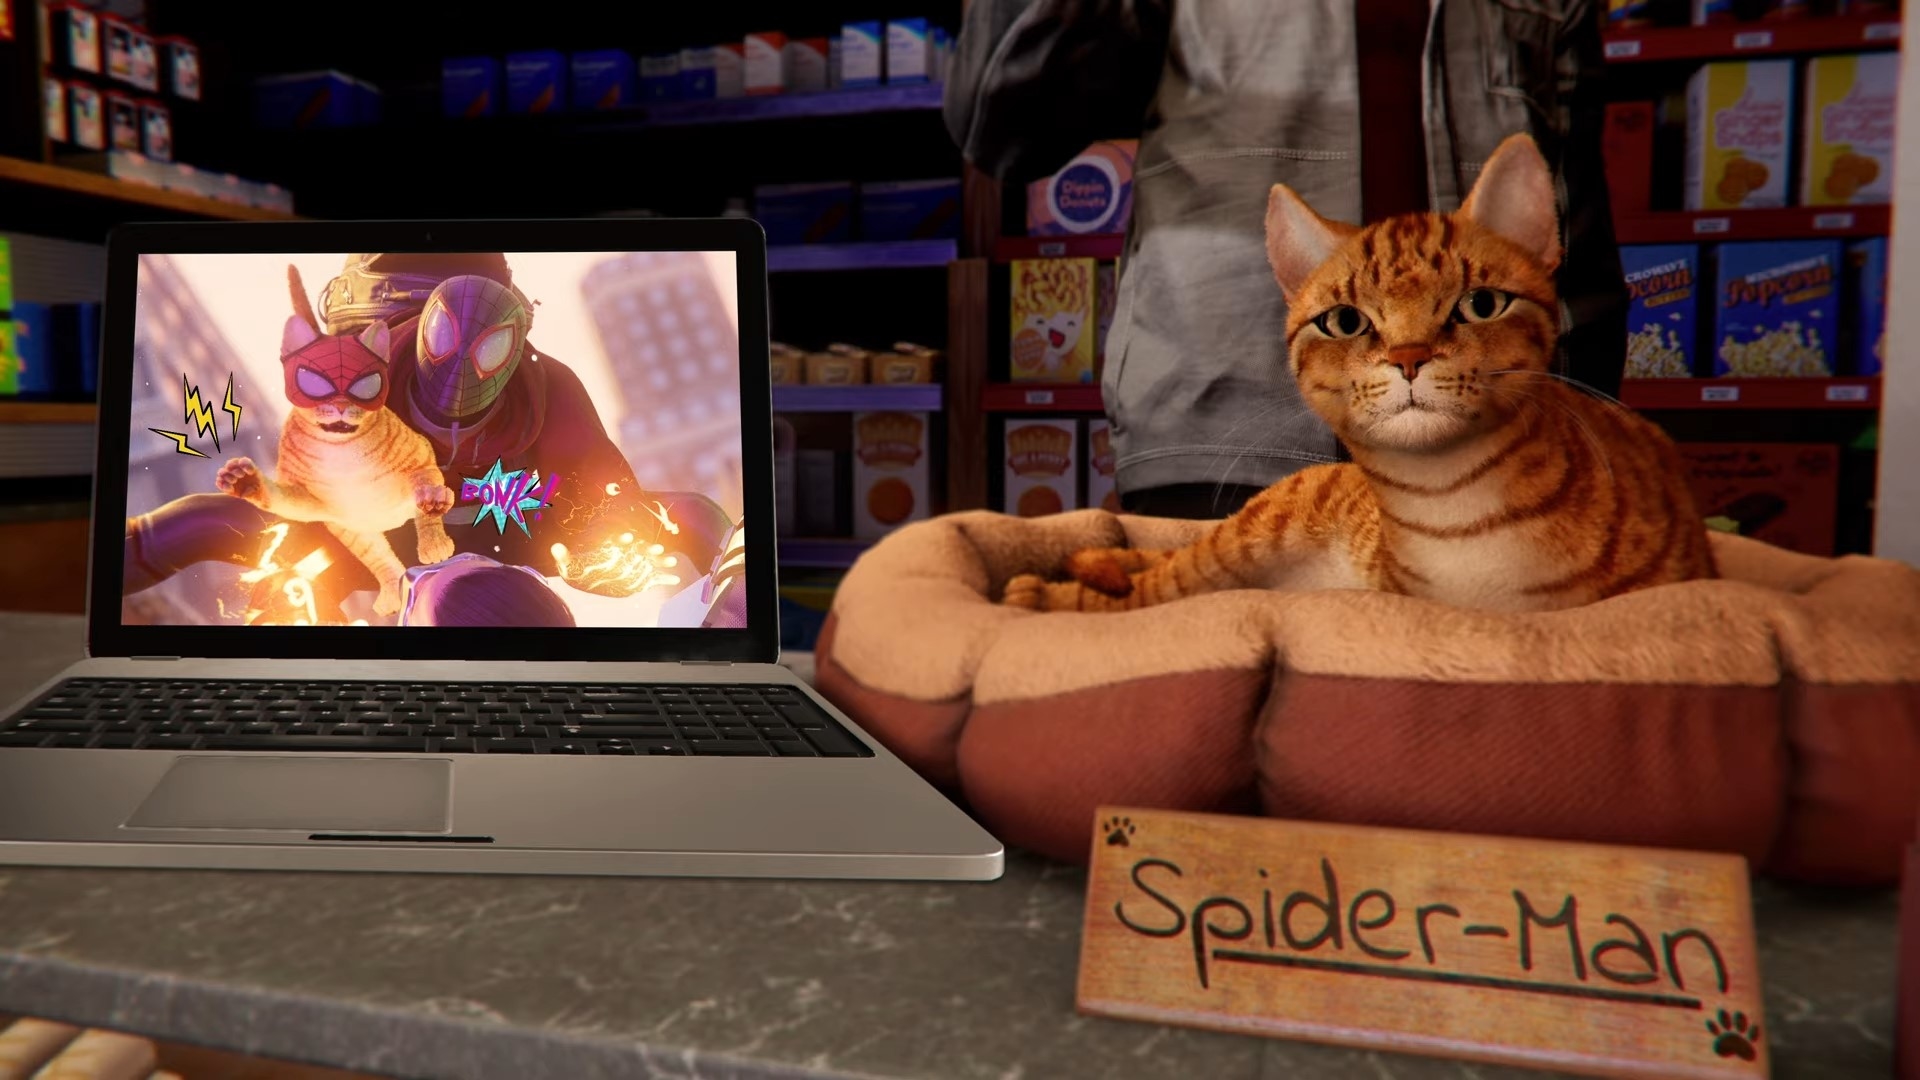 3980x4480 Miles Morales and his Cat 3980x4480 Resolution Wallpaper, HD ...